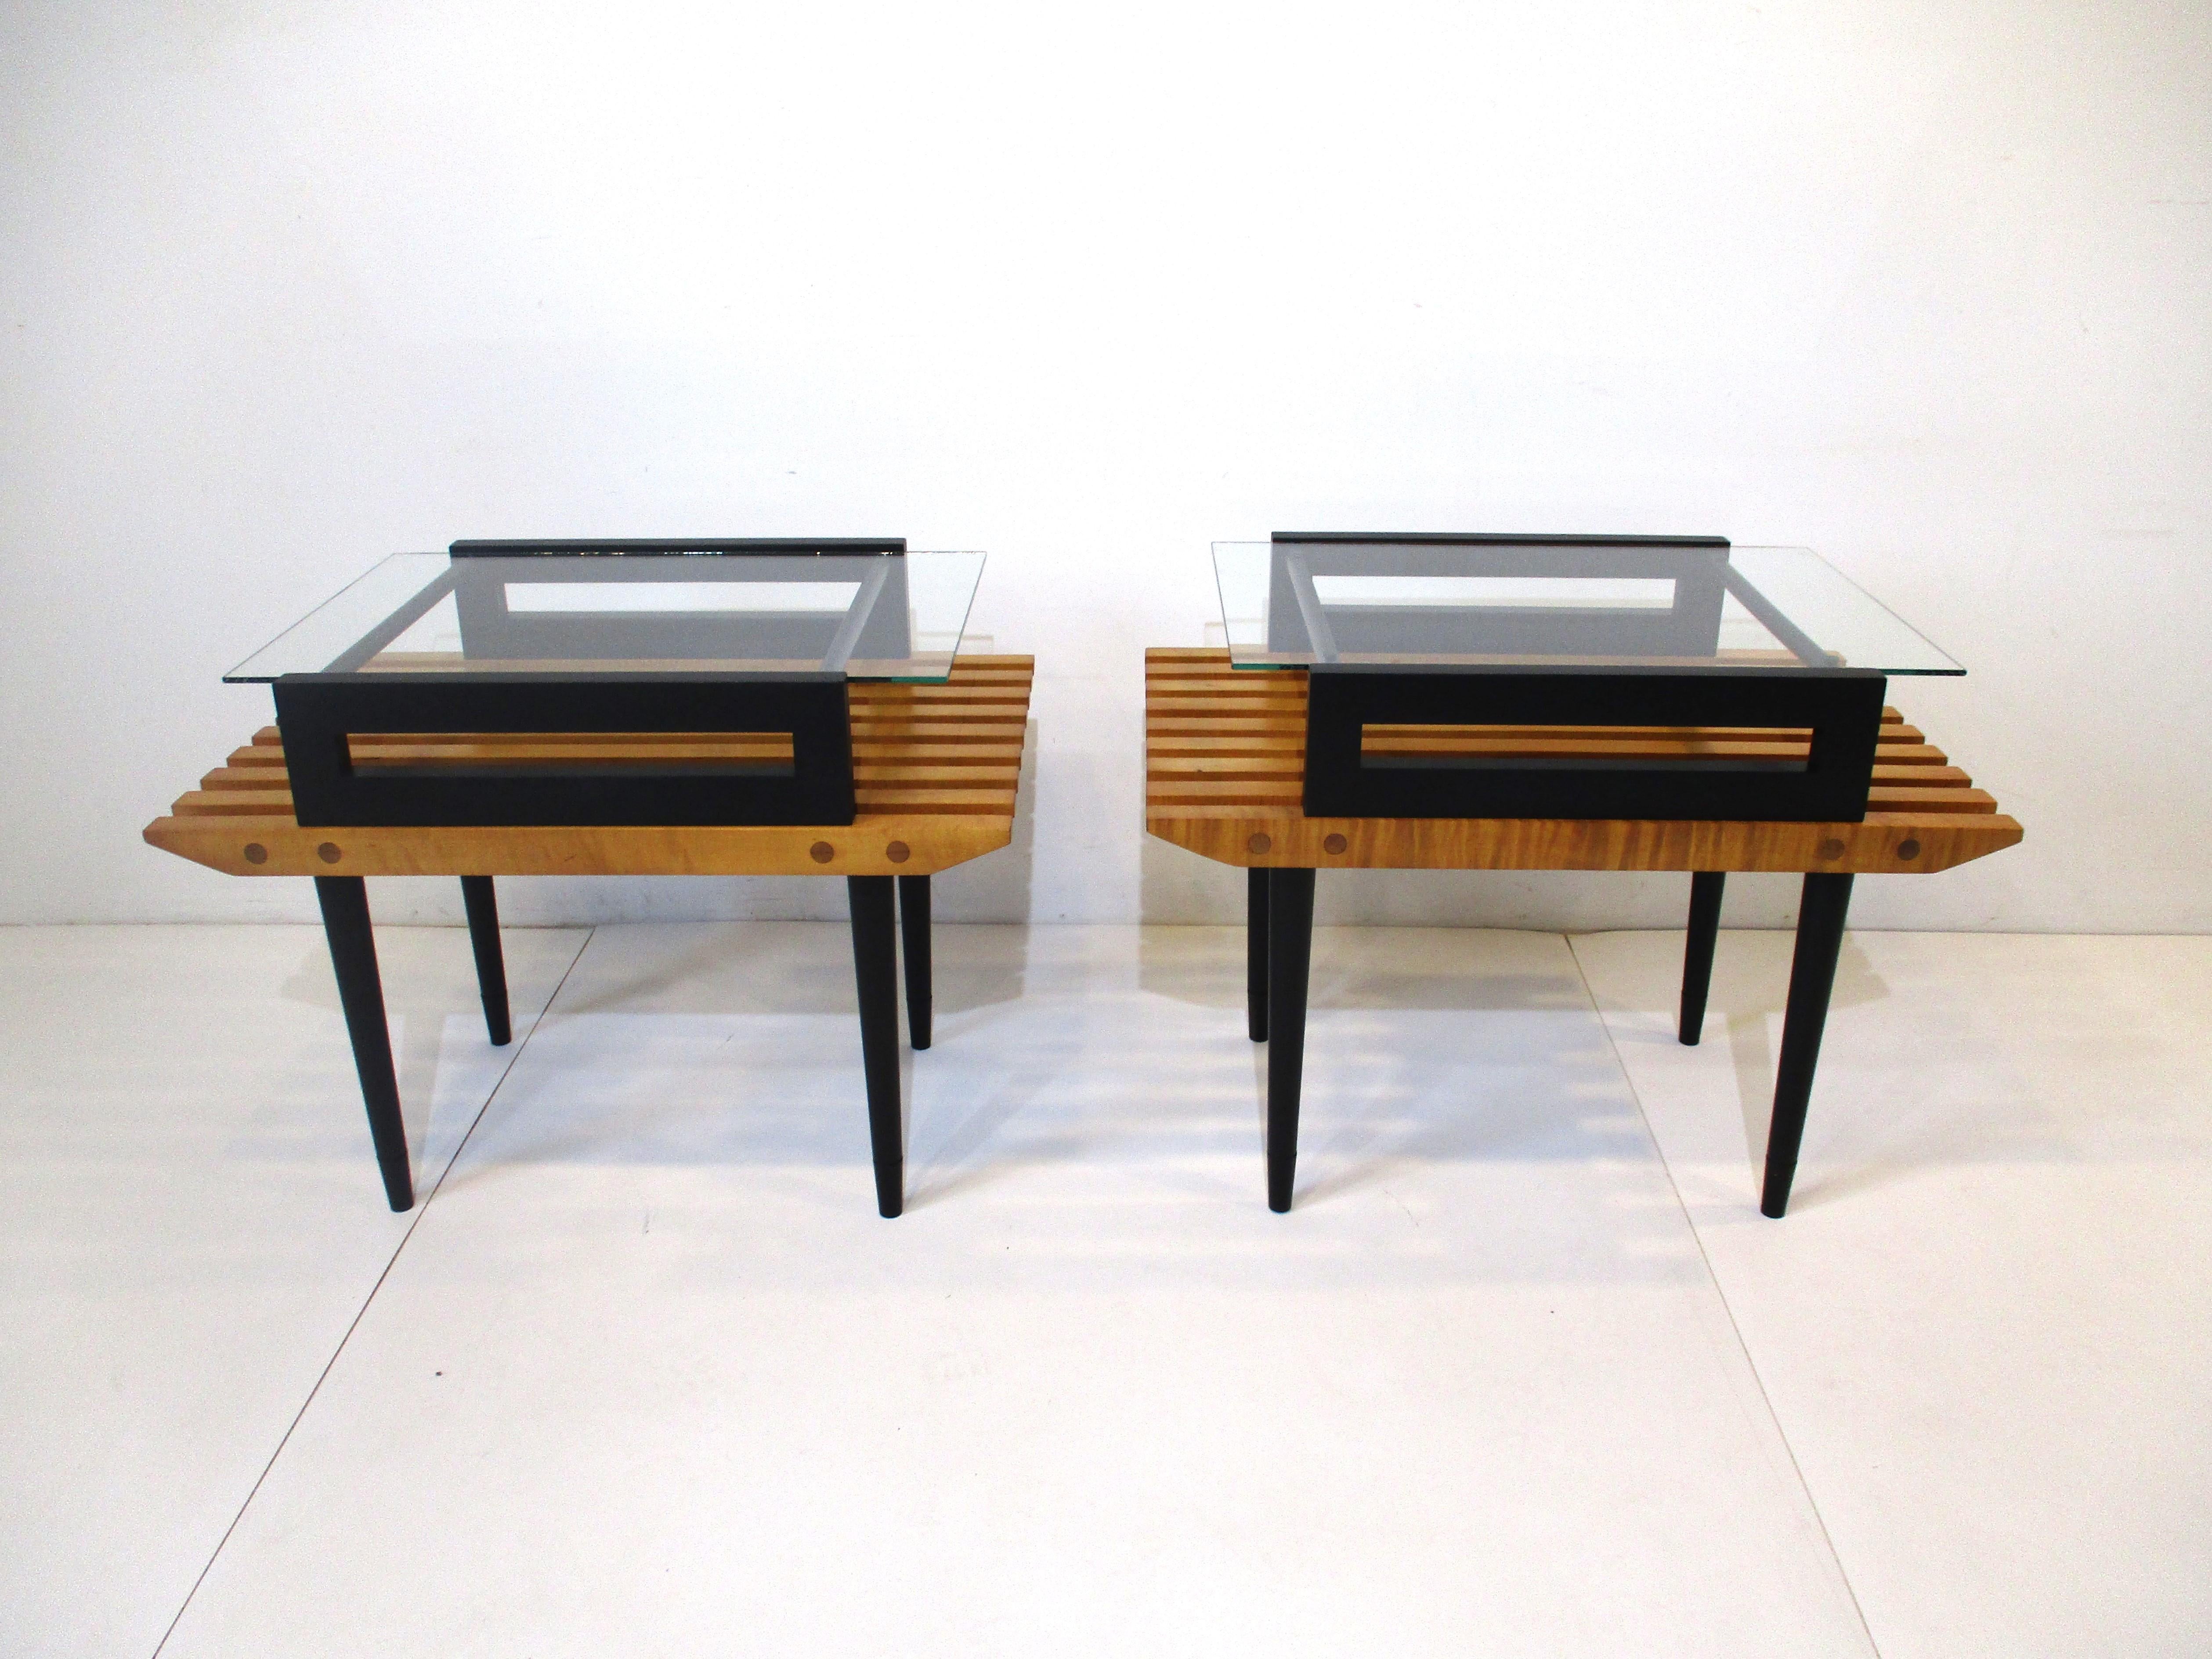 A pair of heavy well crafted solid maple slat wood side / end tables with satin black legs and upper shelve . A glass insert to the top gives the pieces a light clean look having beveled front and rear slats and dowel construction show the quality